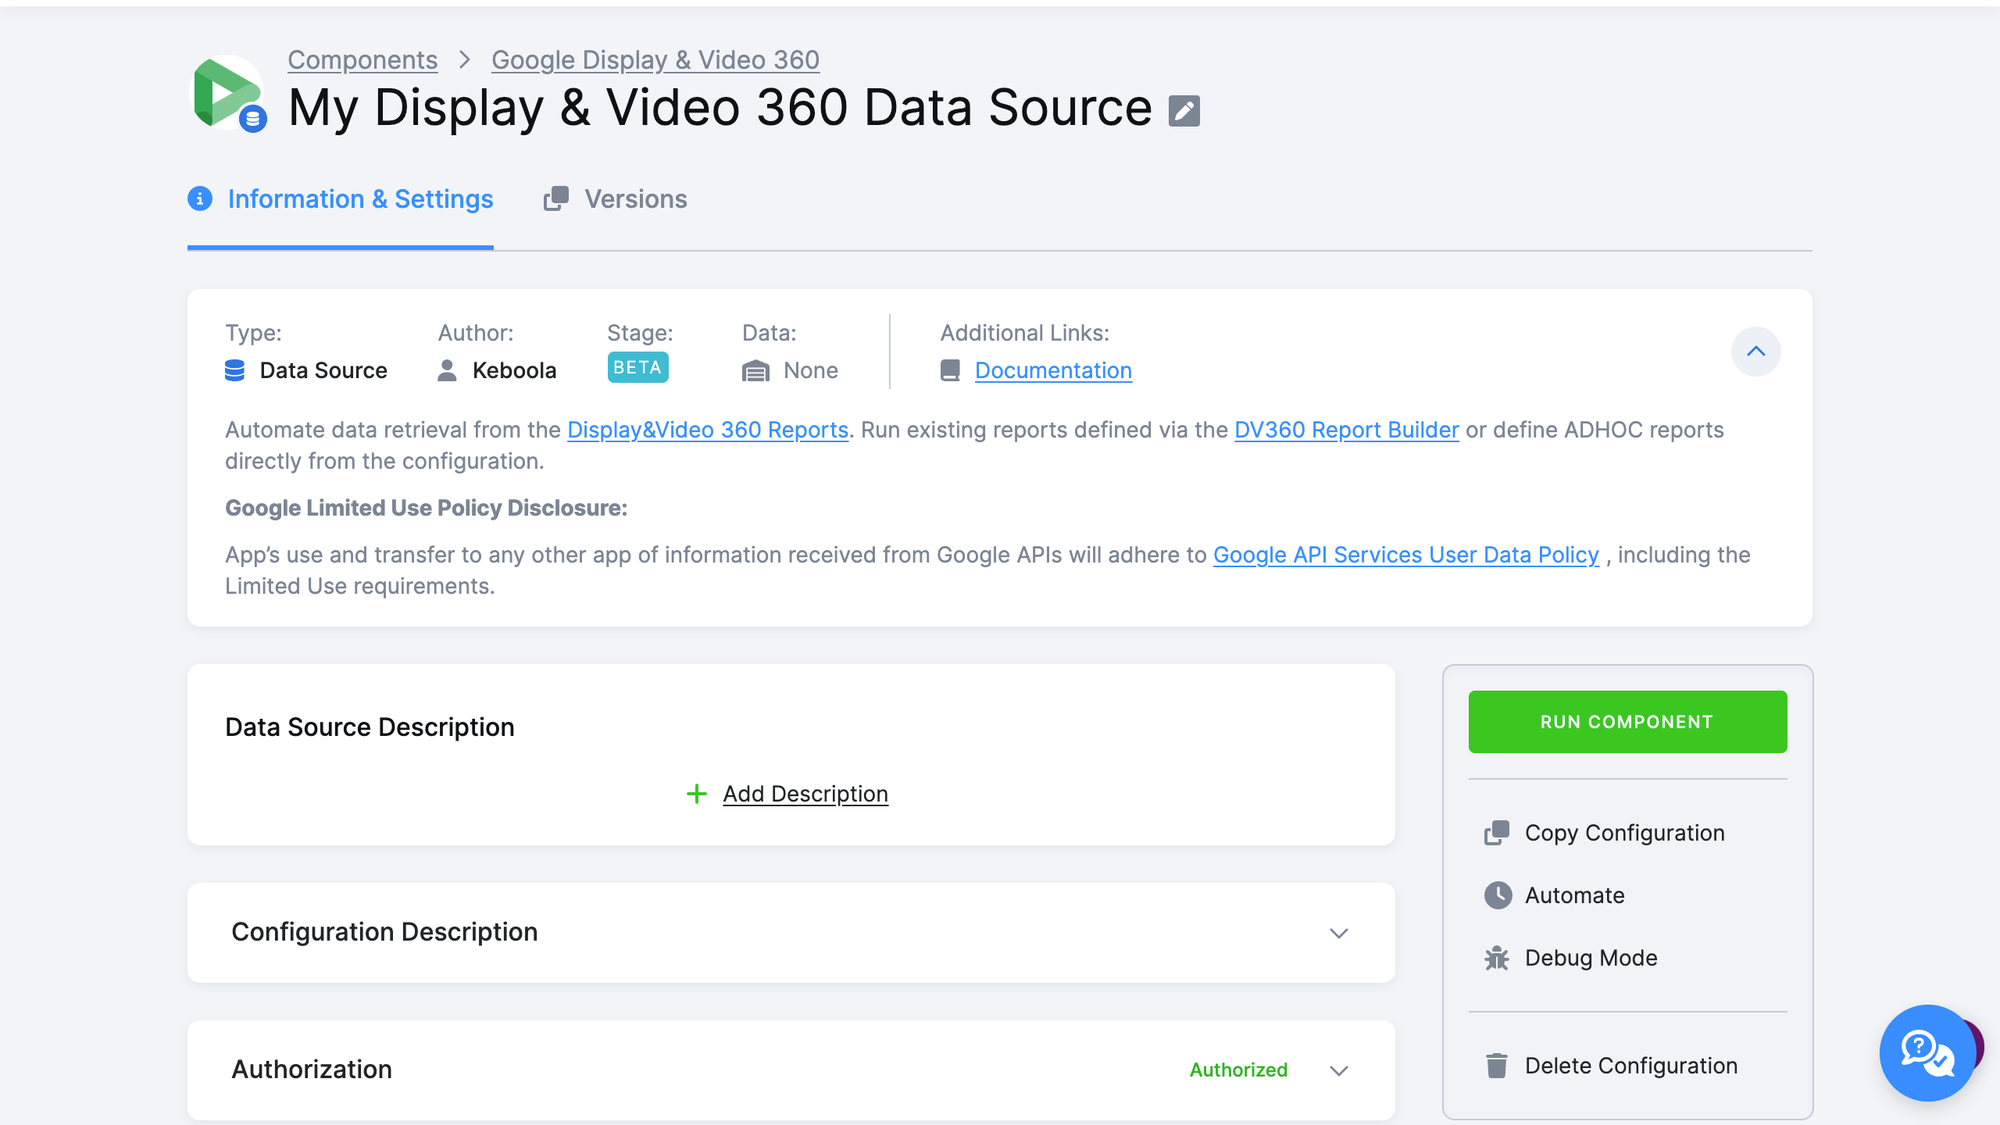 New Data Source for Google Display & Video 360